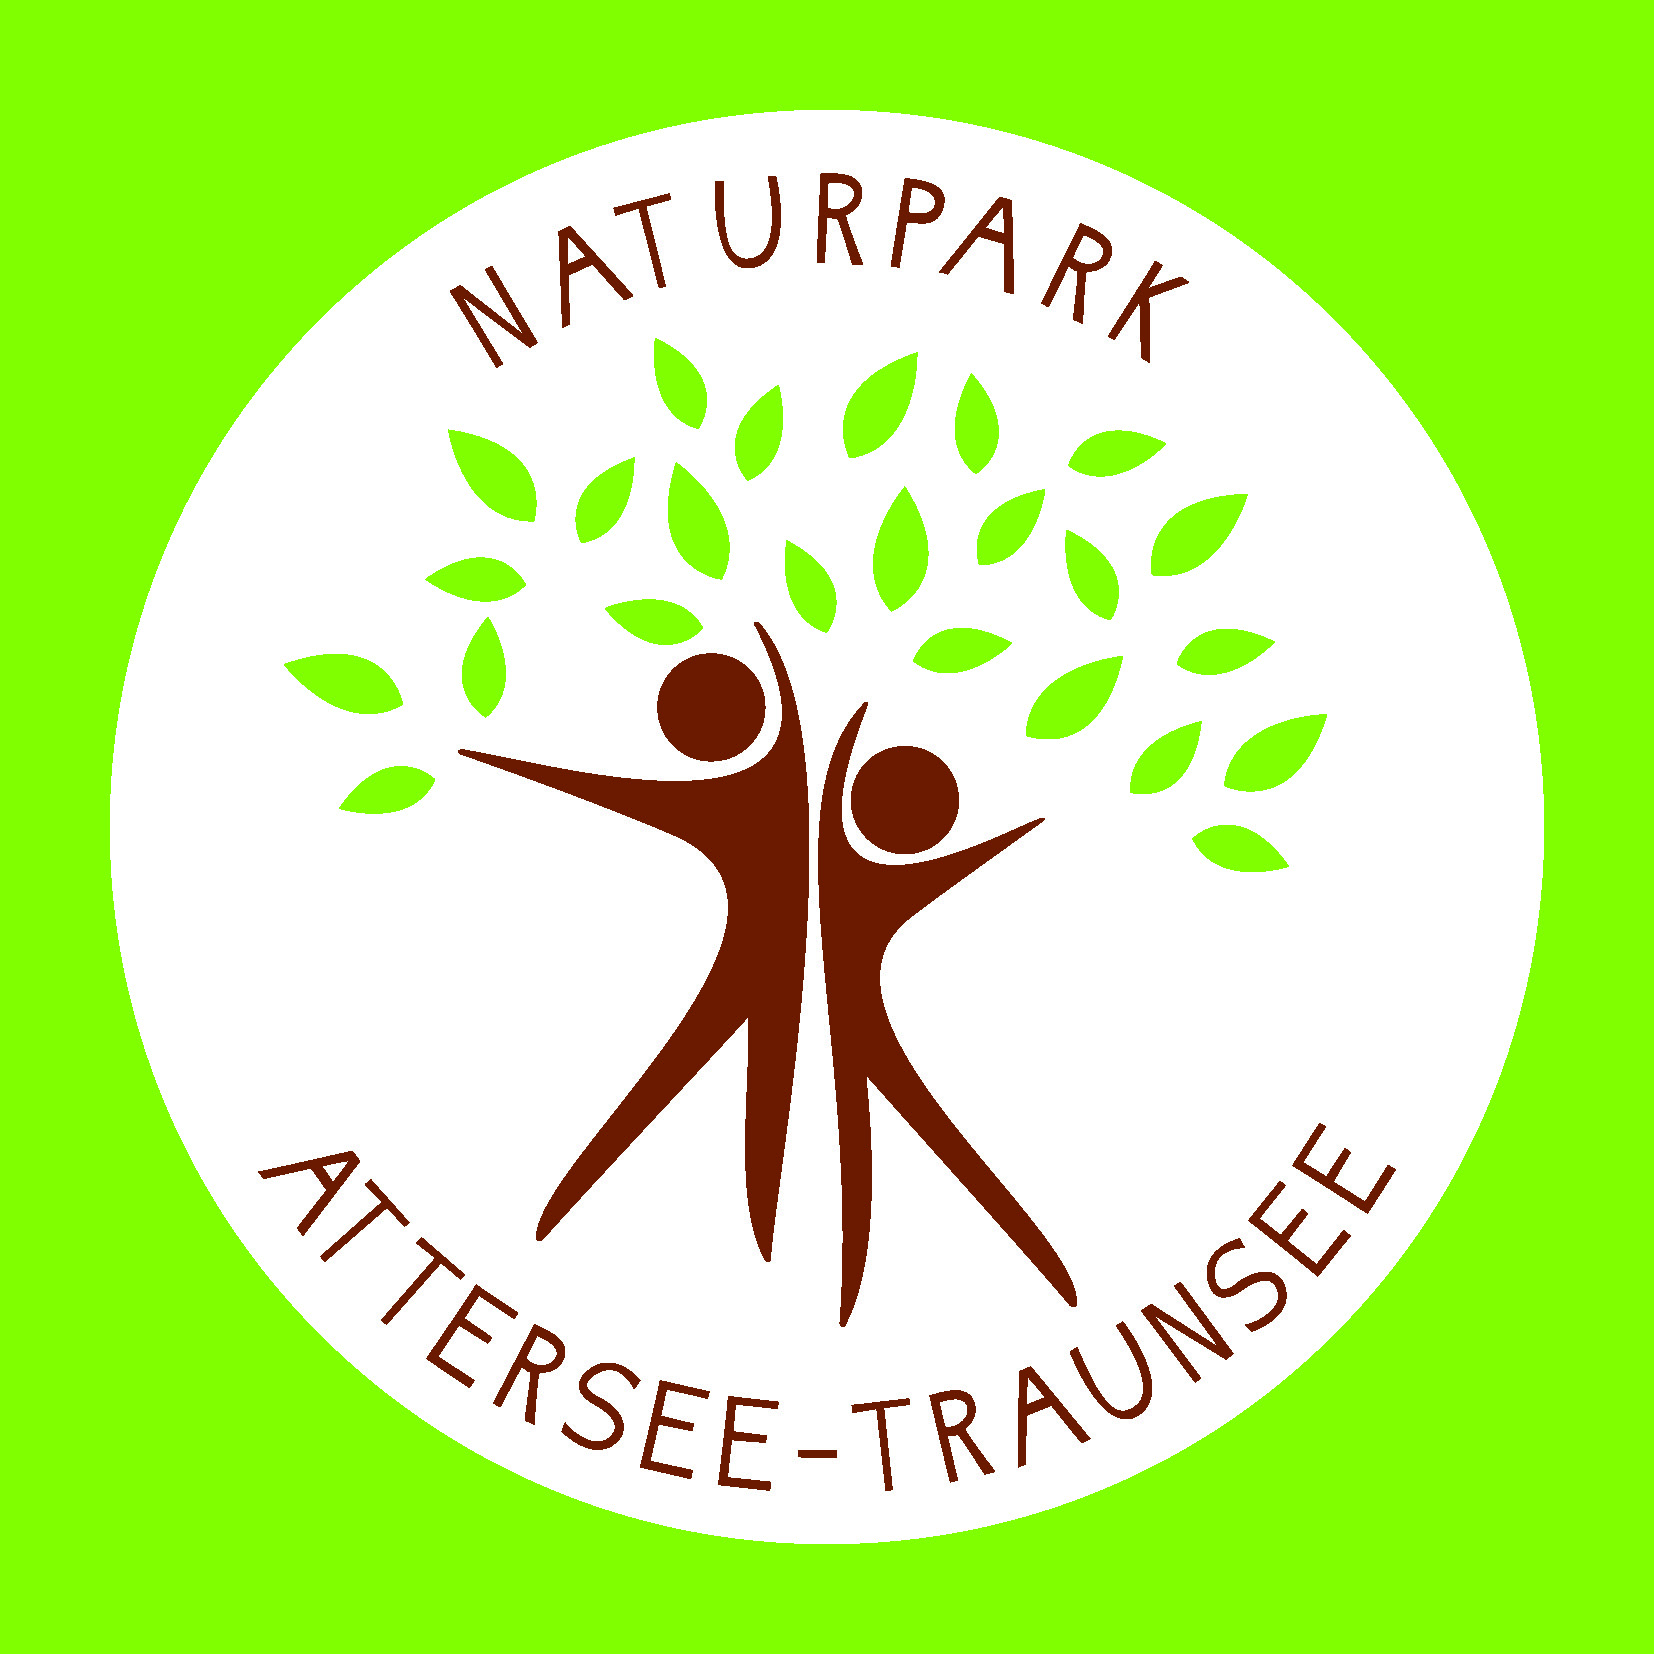 Naturpark Attersee-Traunsee